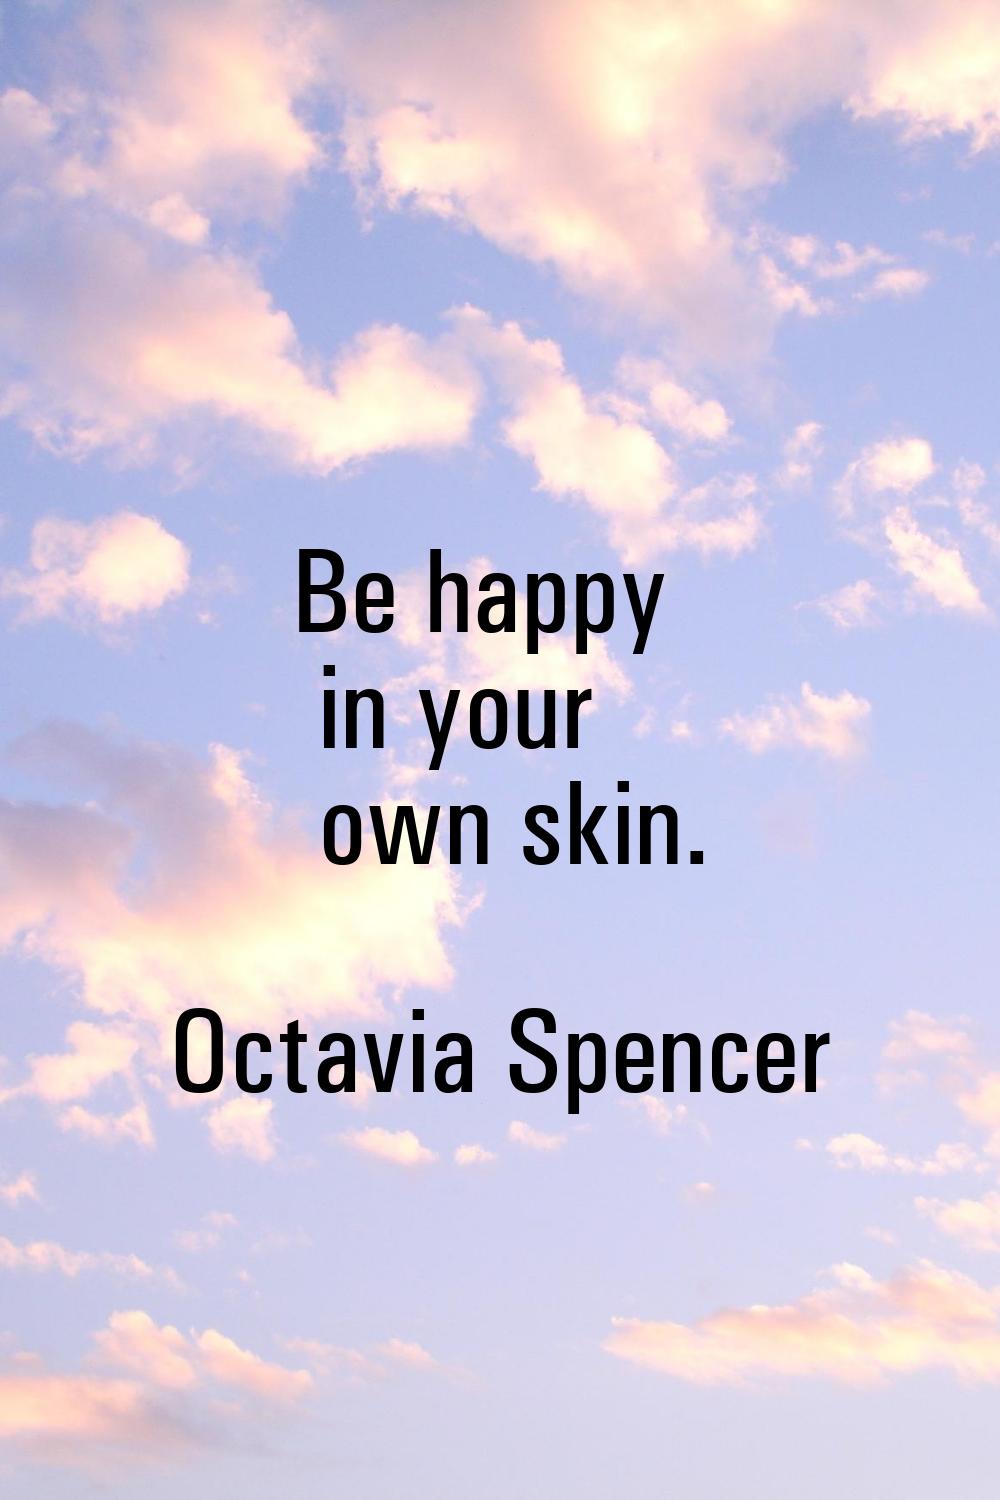 Be happy in your own skin.